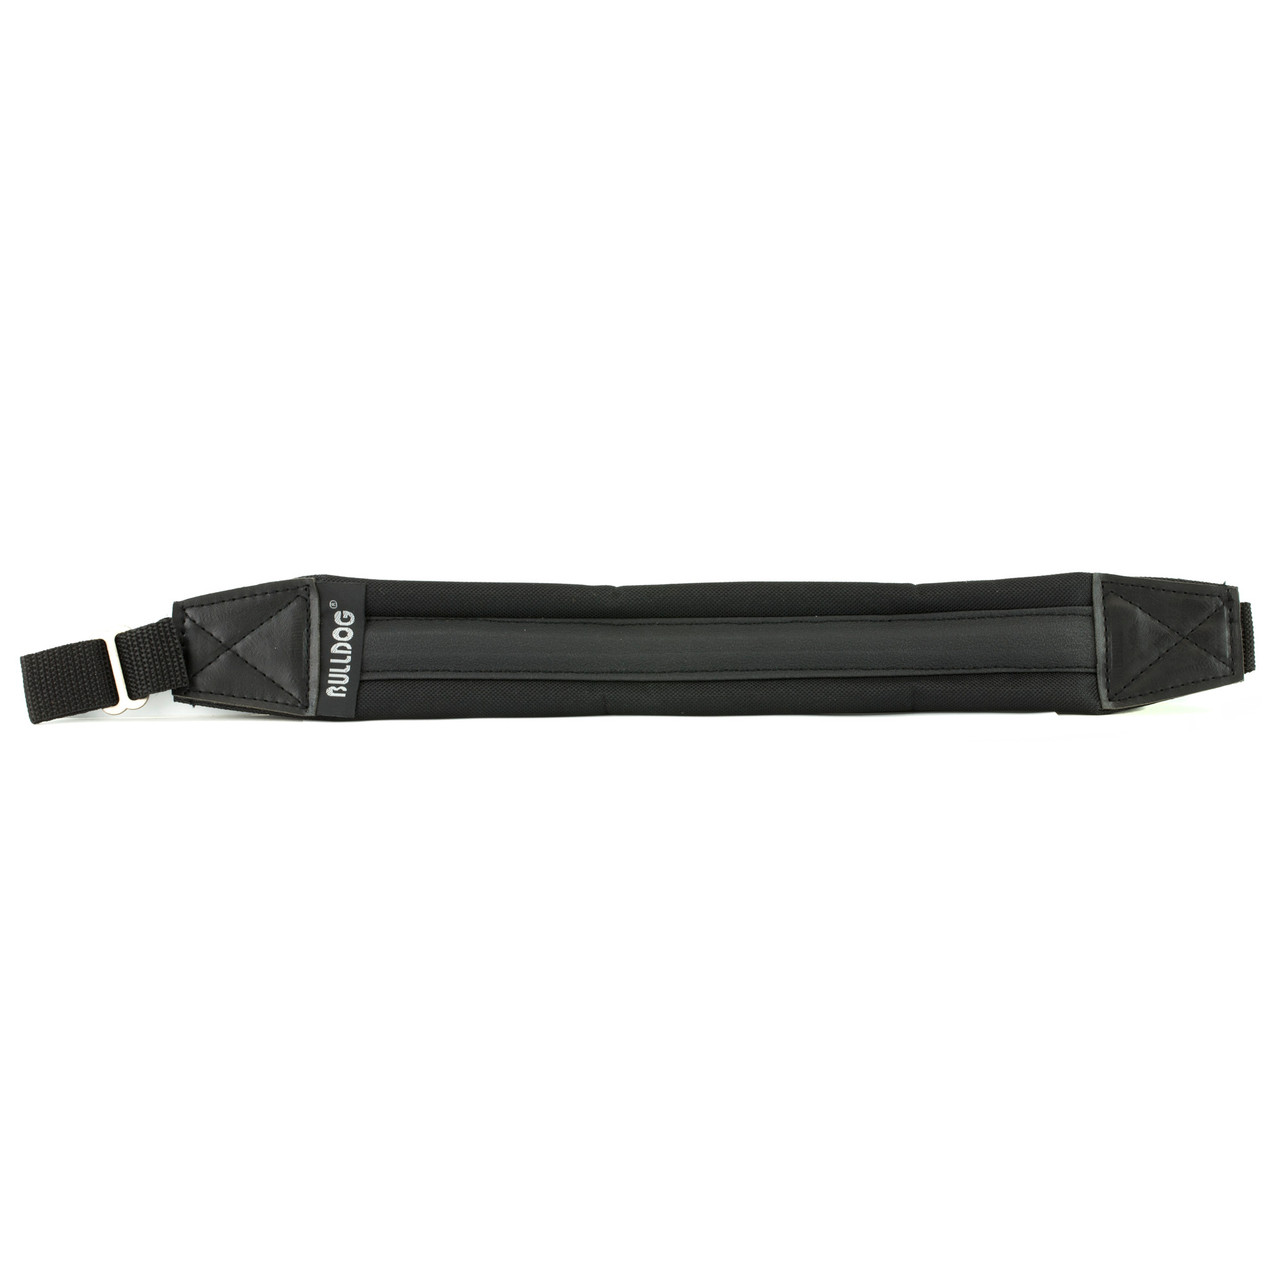 Bulldog Cases BD810 Blk Deluxe Rifle Sling